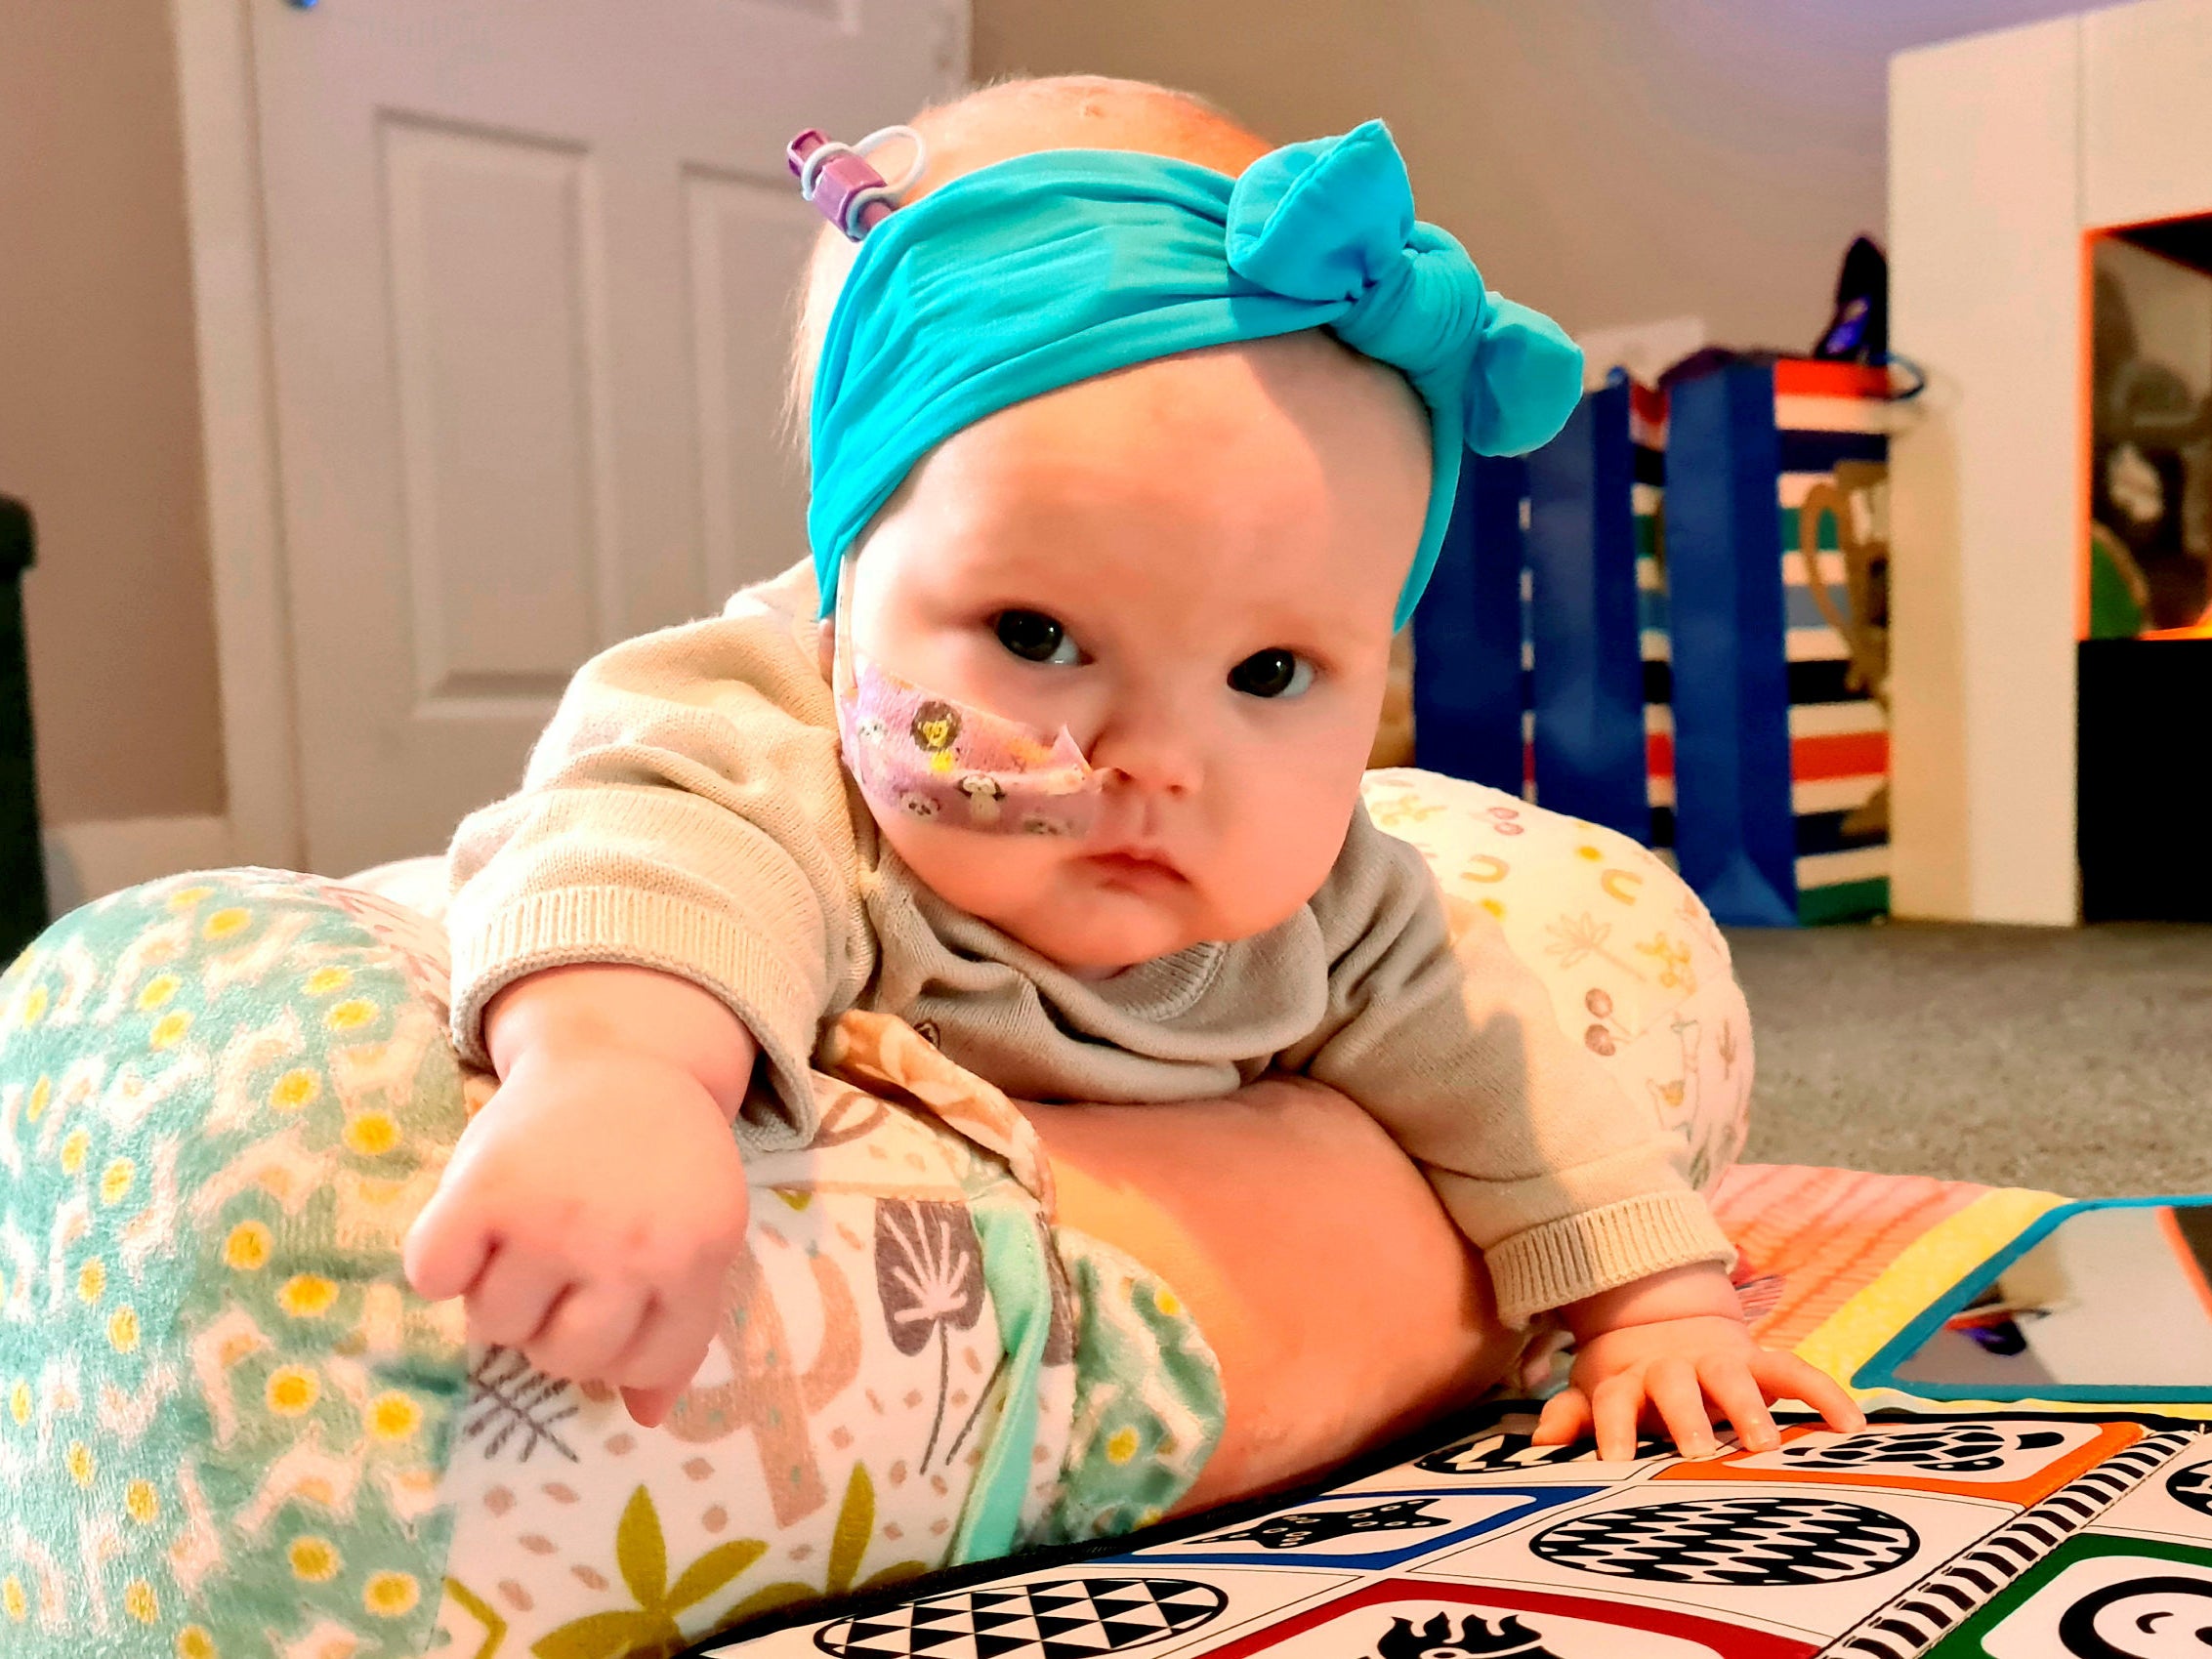 Molly Mai Wardle-Hampton is now undergoing chemotherapy for a rare form of cancer.